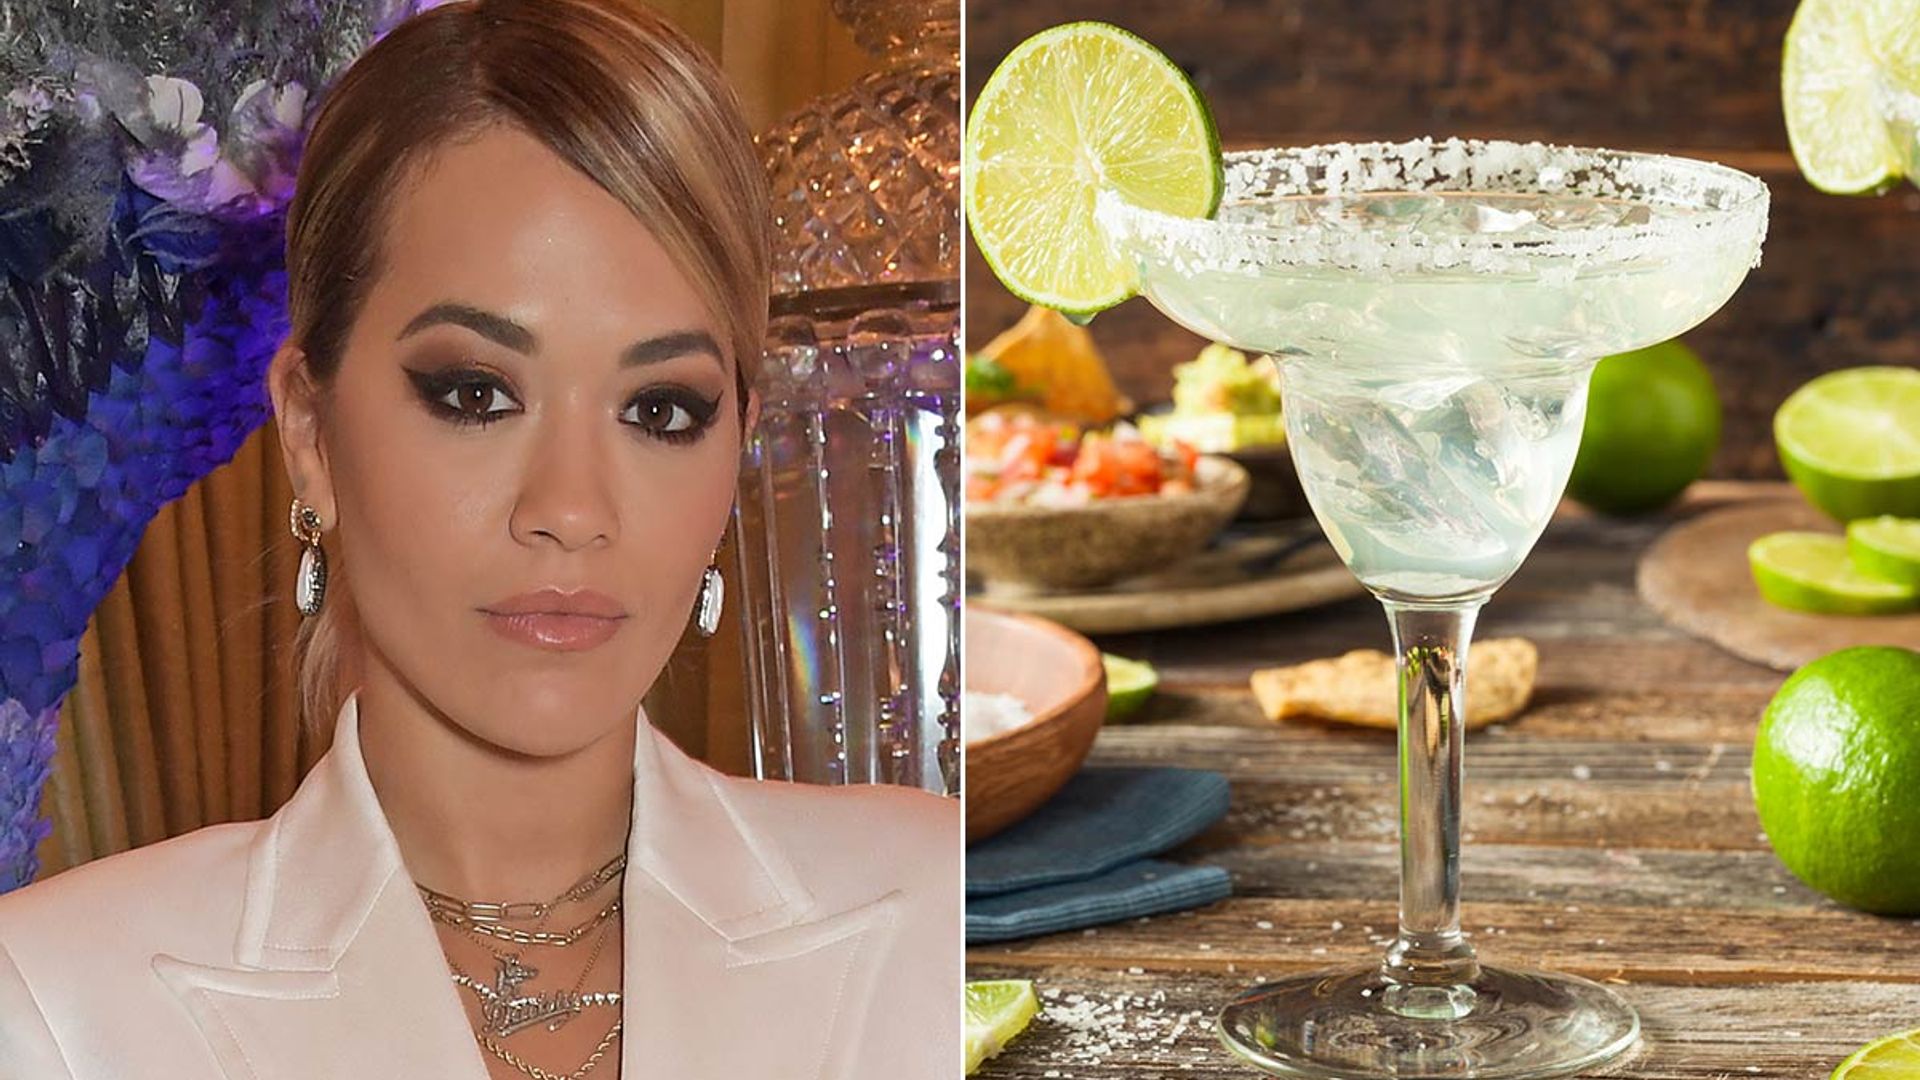 Rita Ora makes frozen margaritas using very unusual kitchen utensils - and fans are obsessed